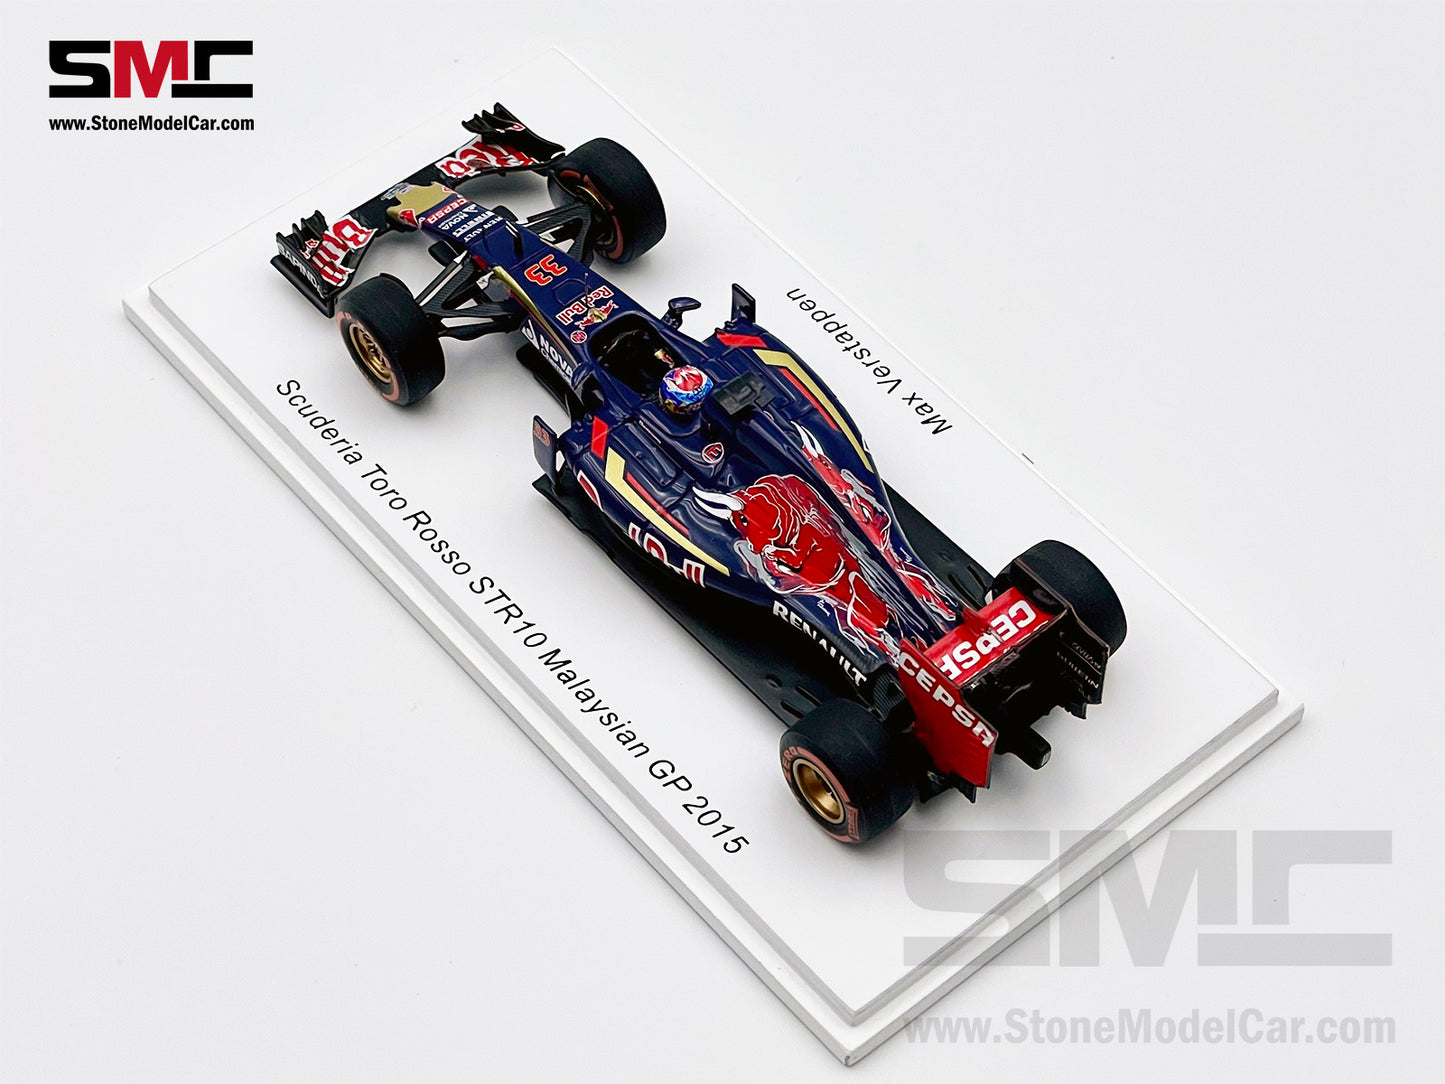 1:43 Spark Toro Rosso STR10 #33 Max Verstappen Malaysia 2015 F1 Youngest Point